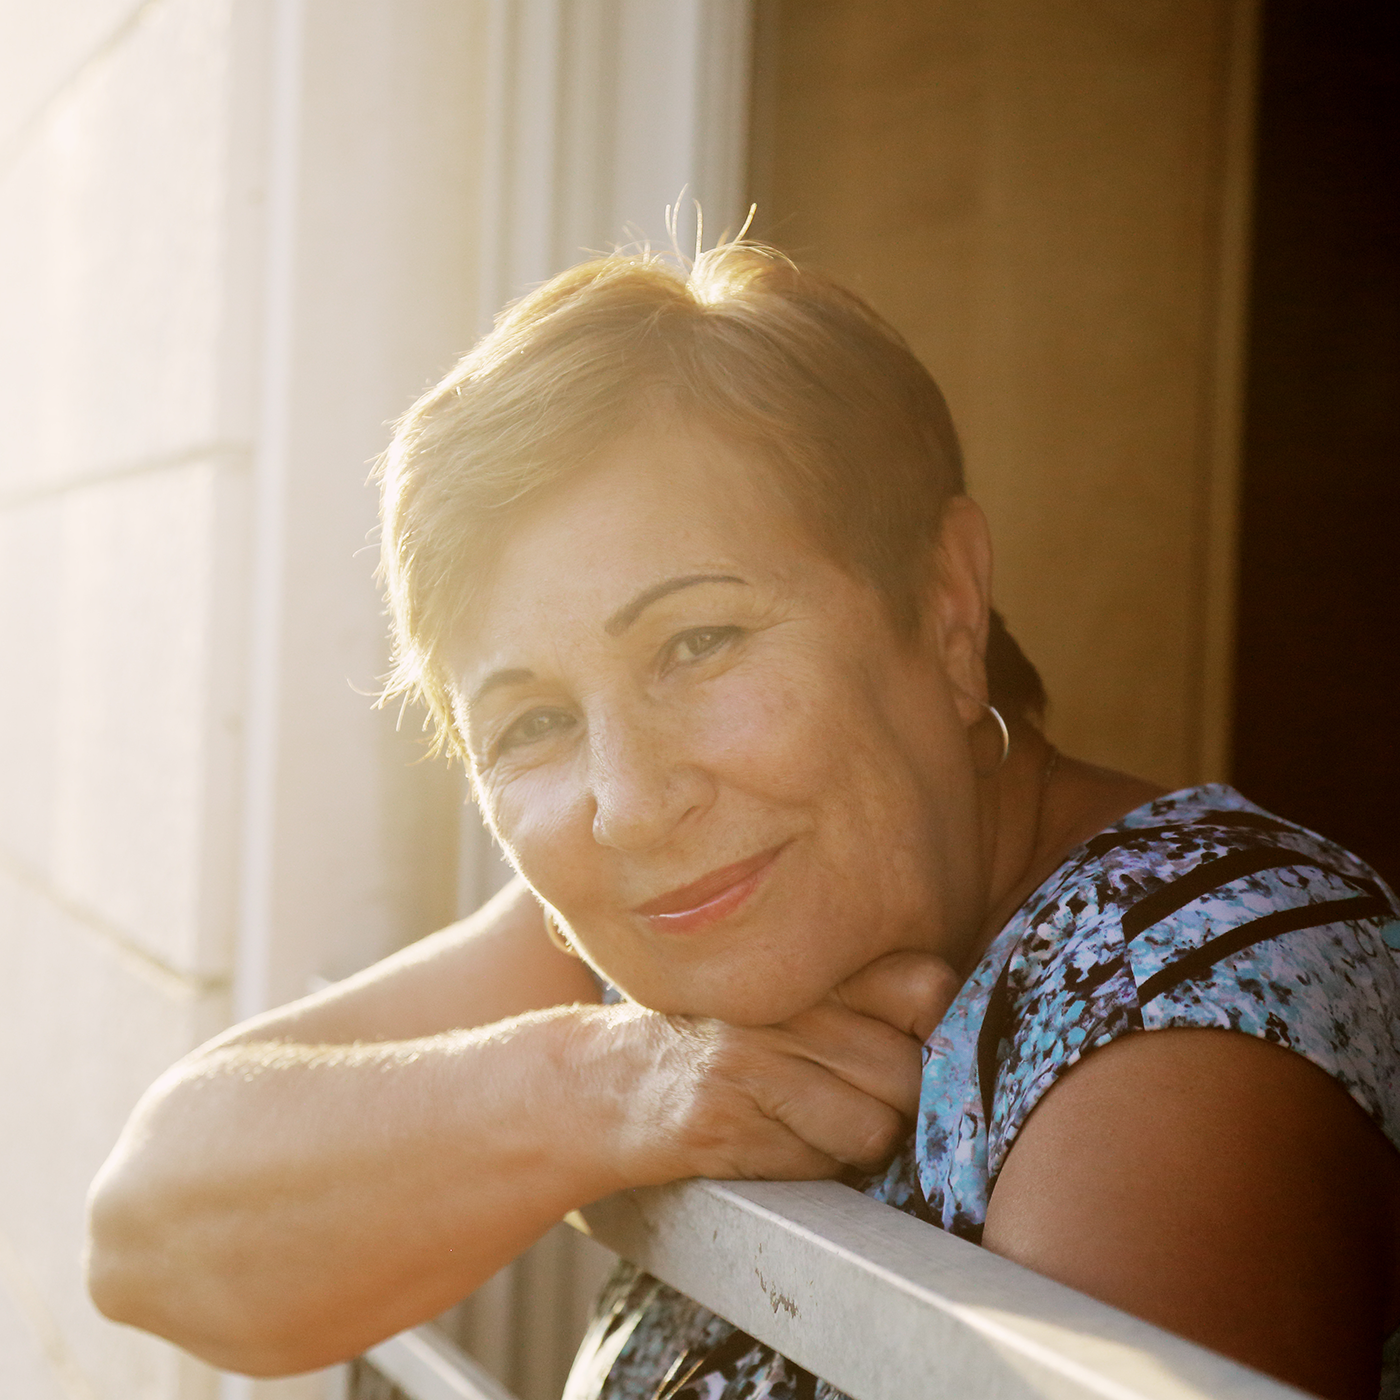 Woman smiling and leaning on patio railing with sun shining on her.